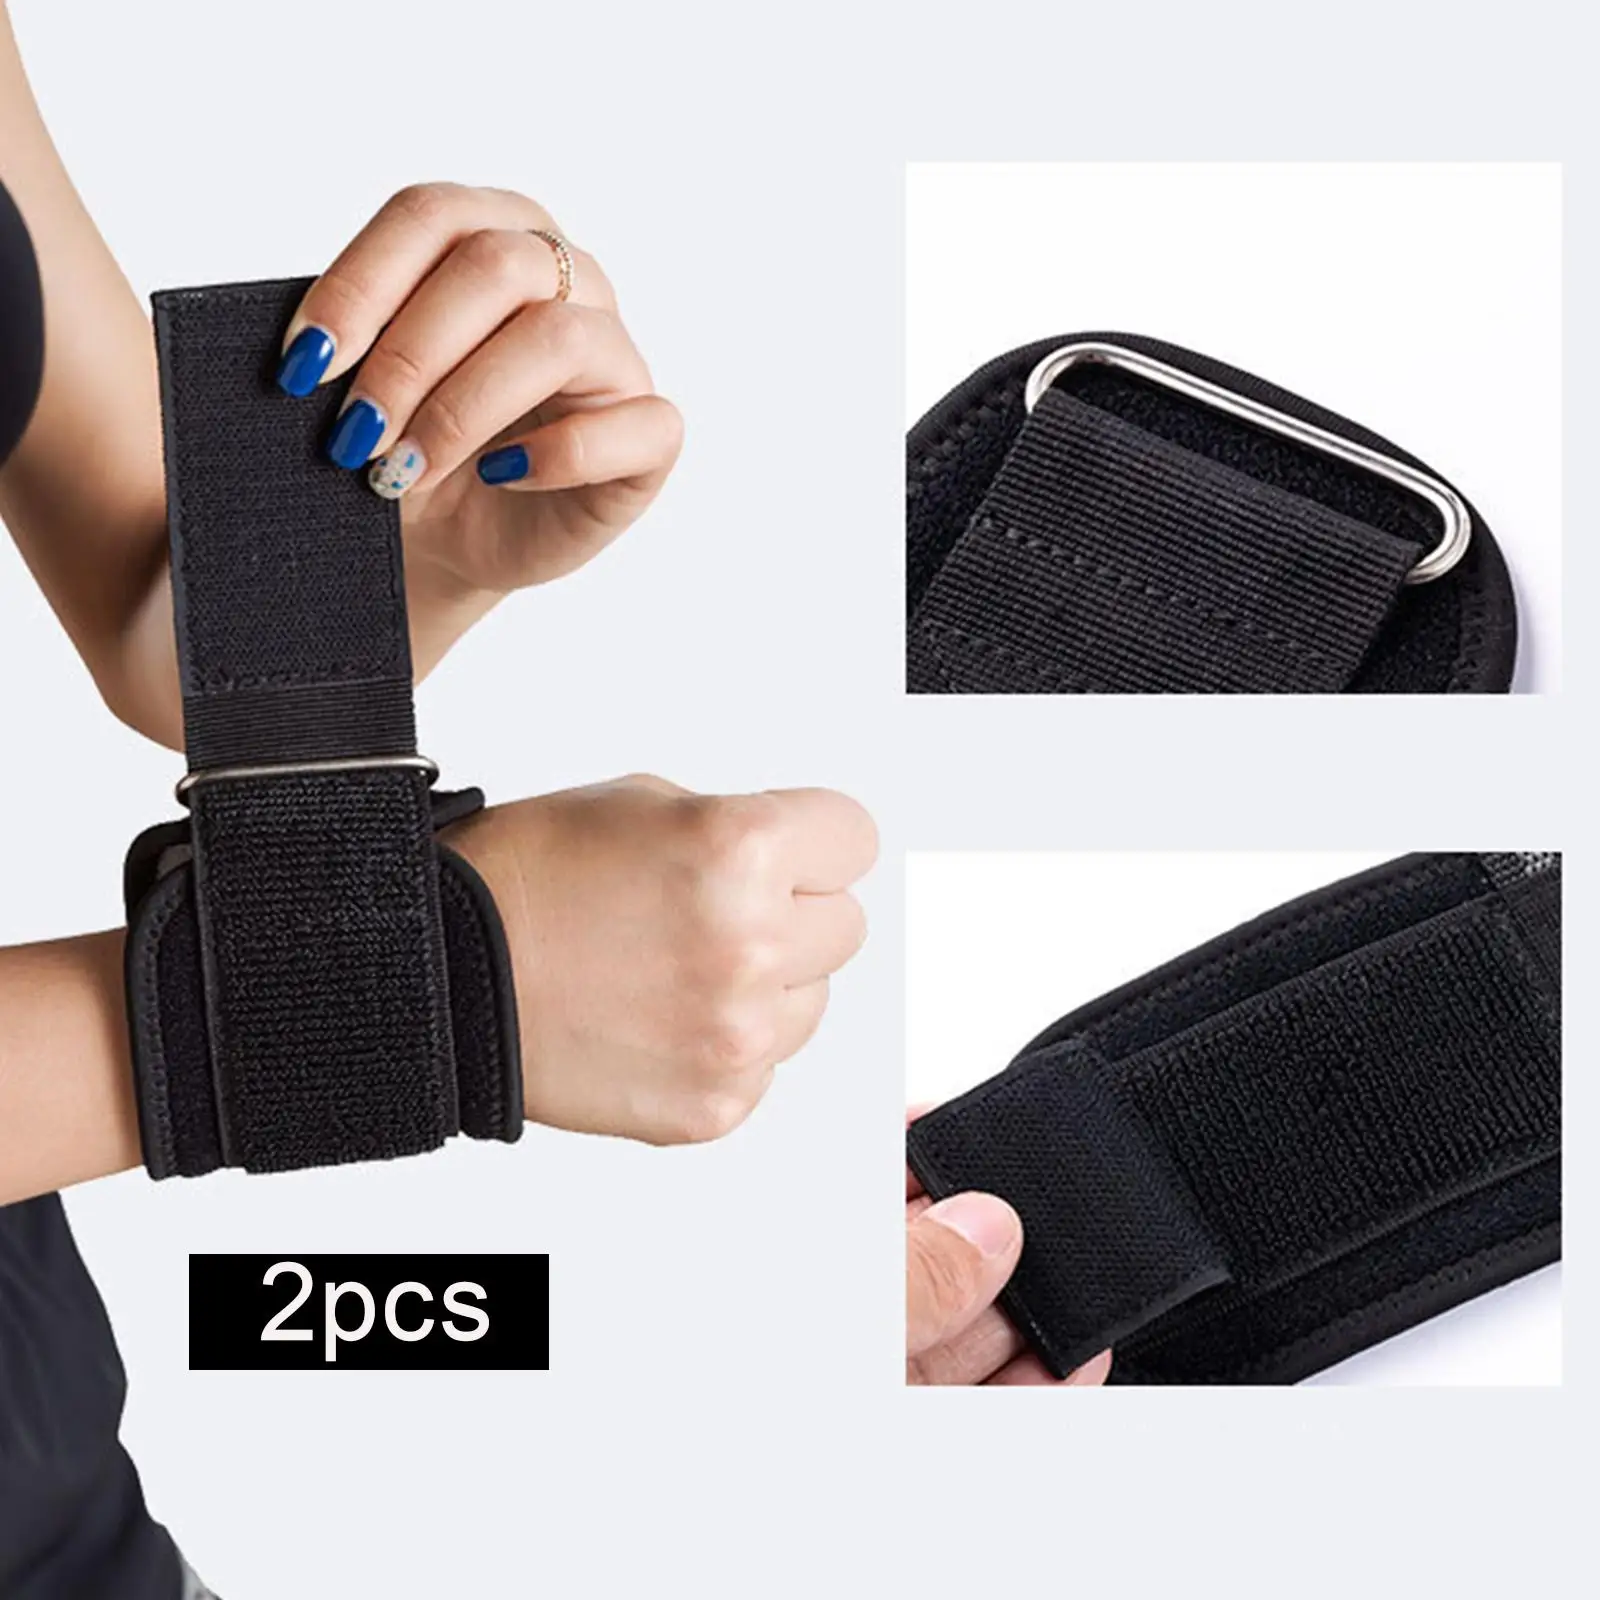 2Pcs Professional Weight Lifting Straps Wristband Palm Protectors with Power Grip Non Slip Protective Gear for Workout